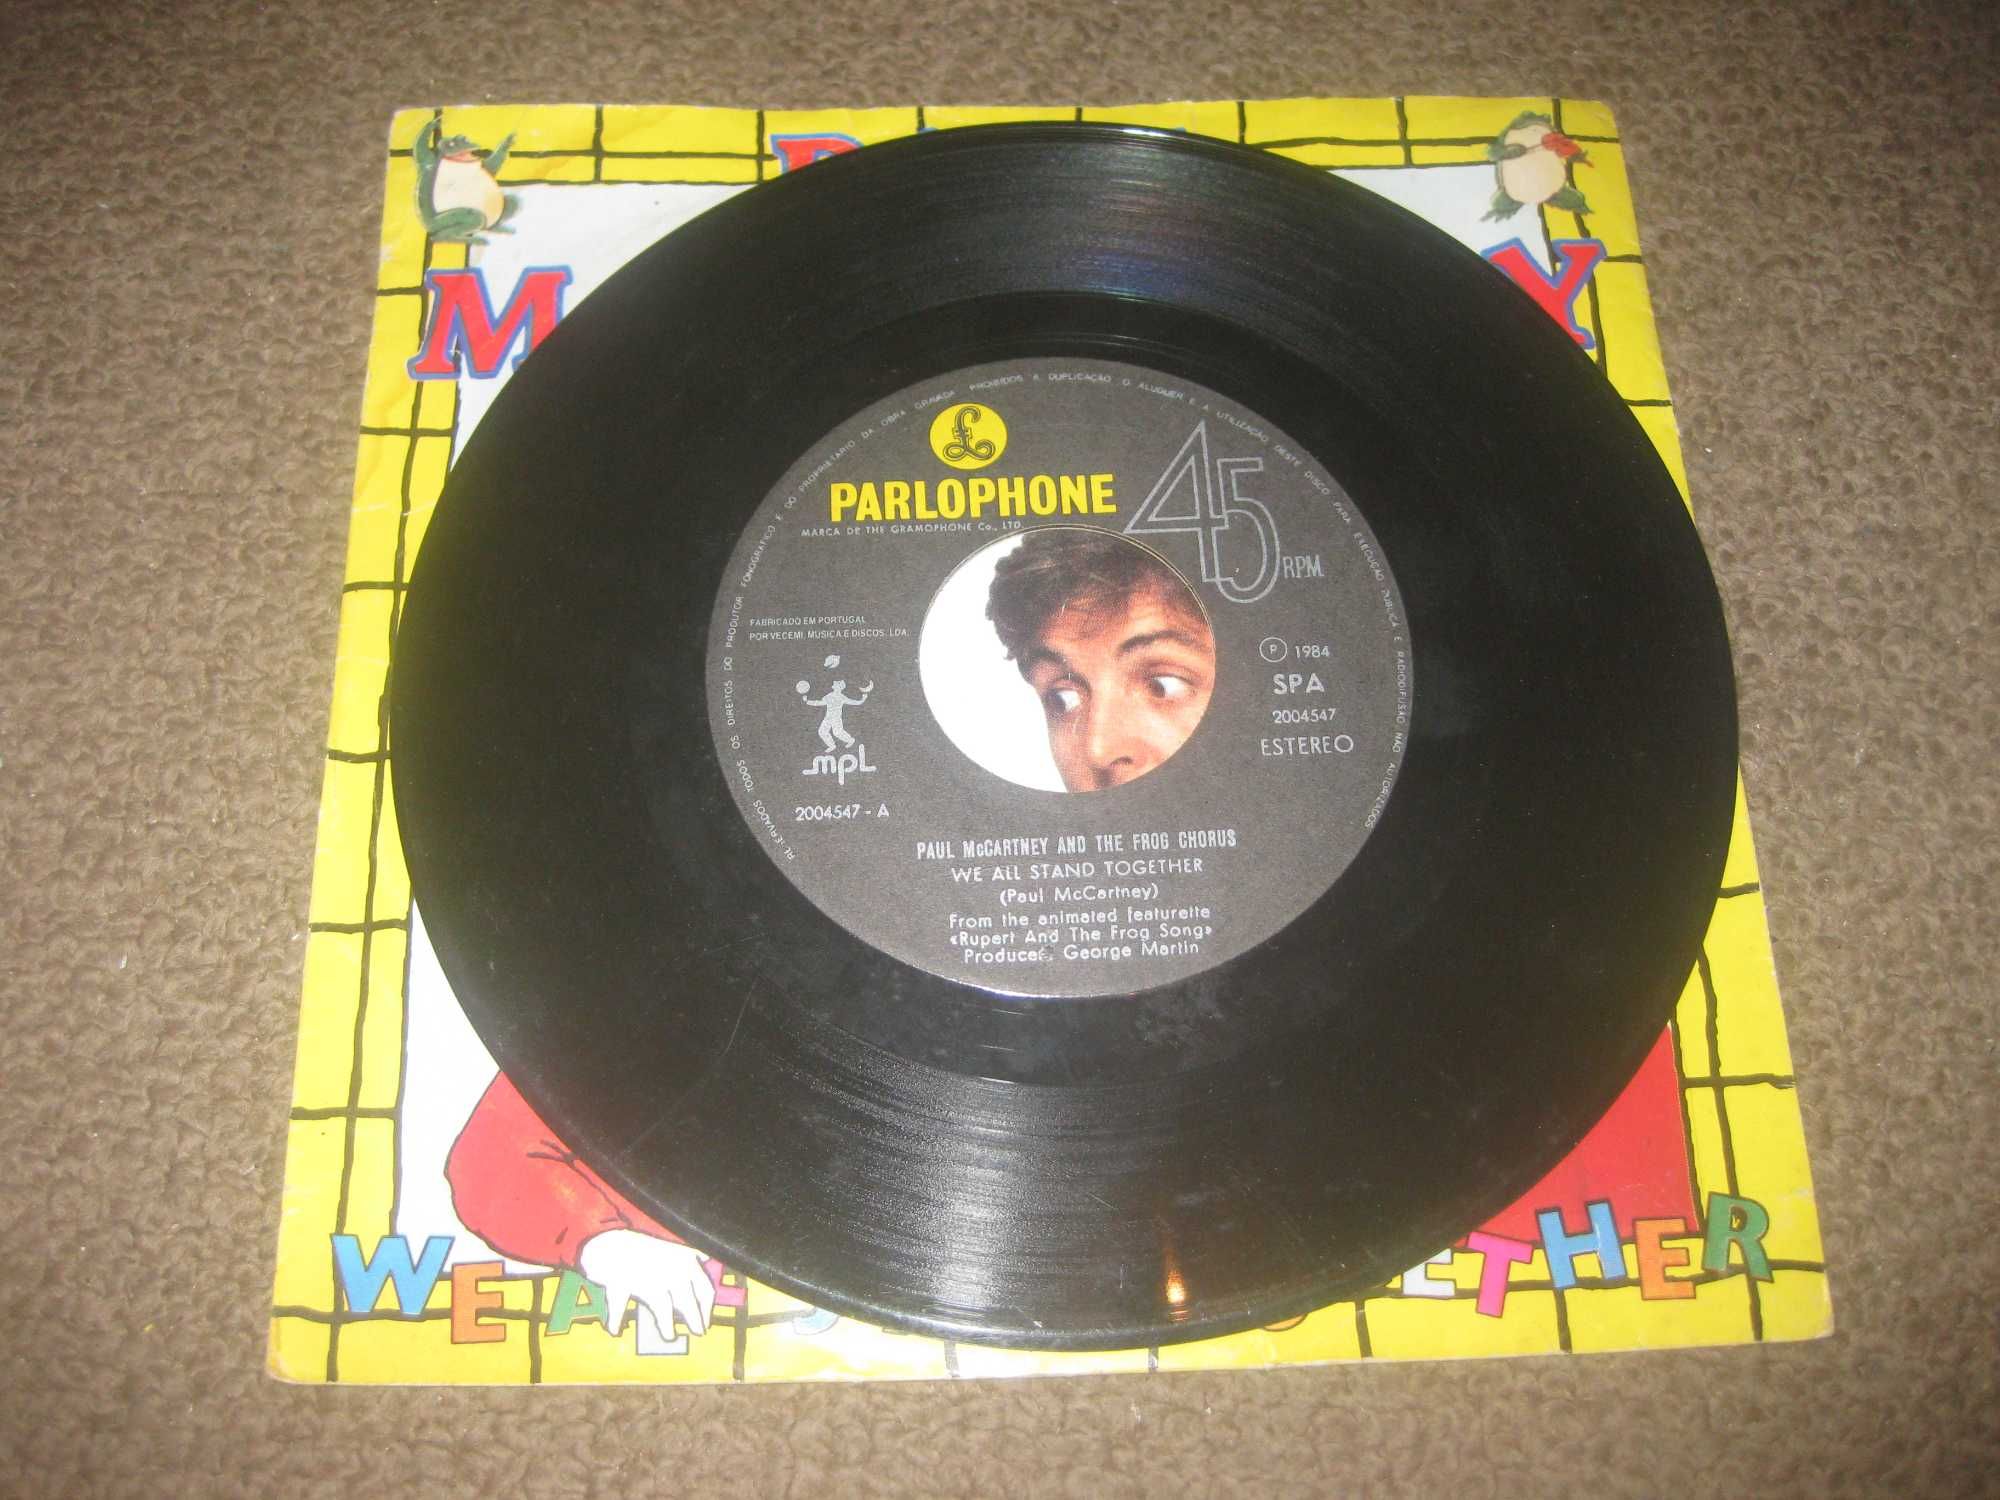 Vinil Single 45 rpm do Paul McCartney "We All Stand Together"